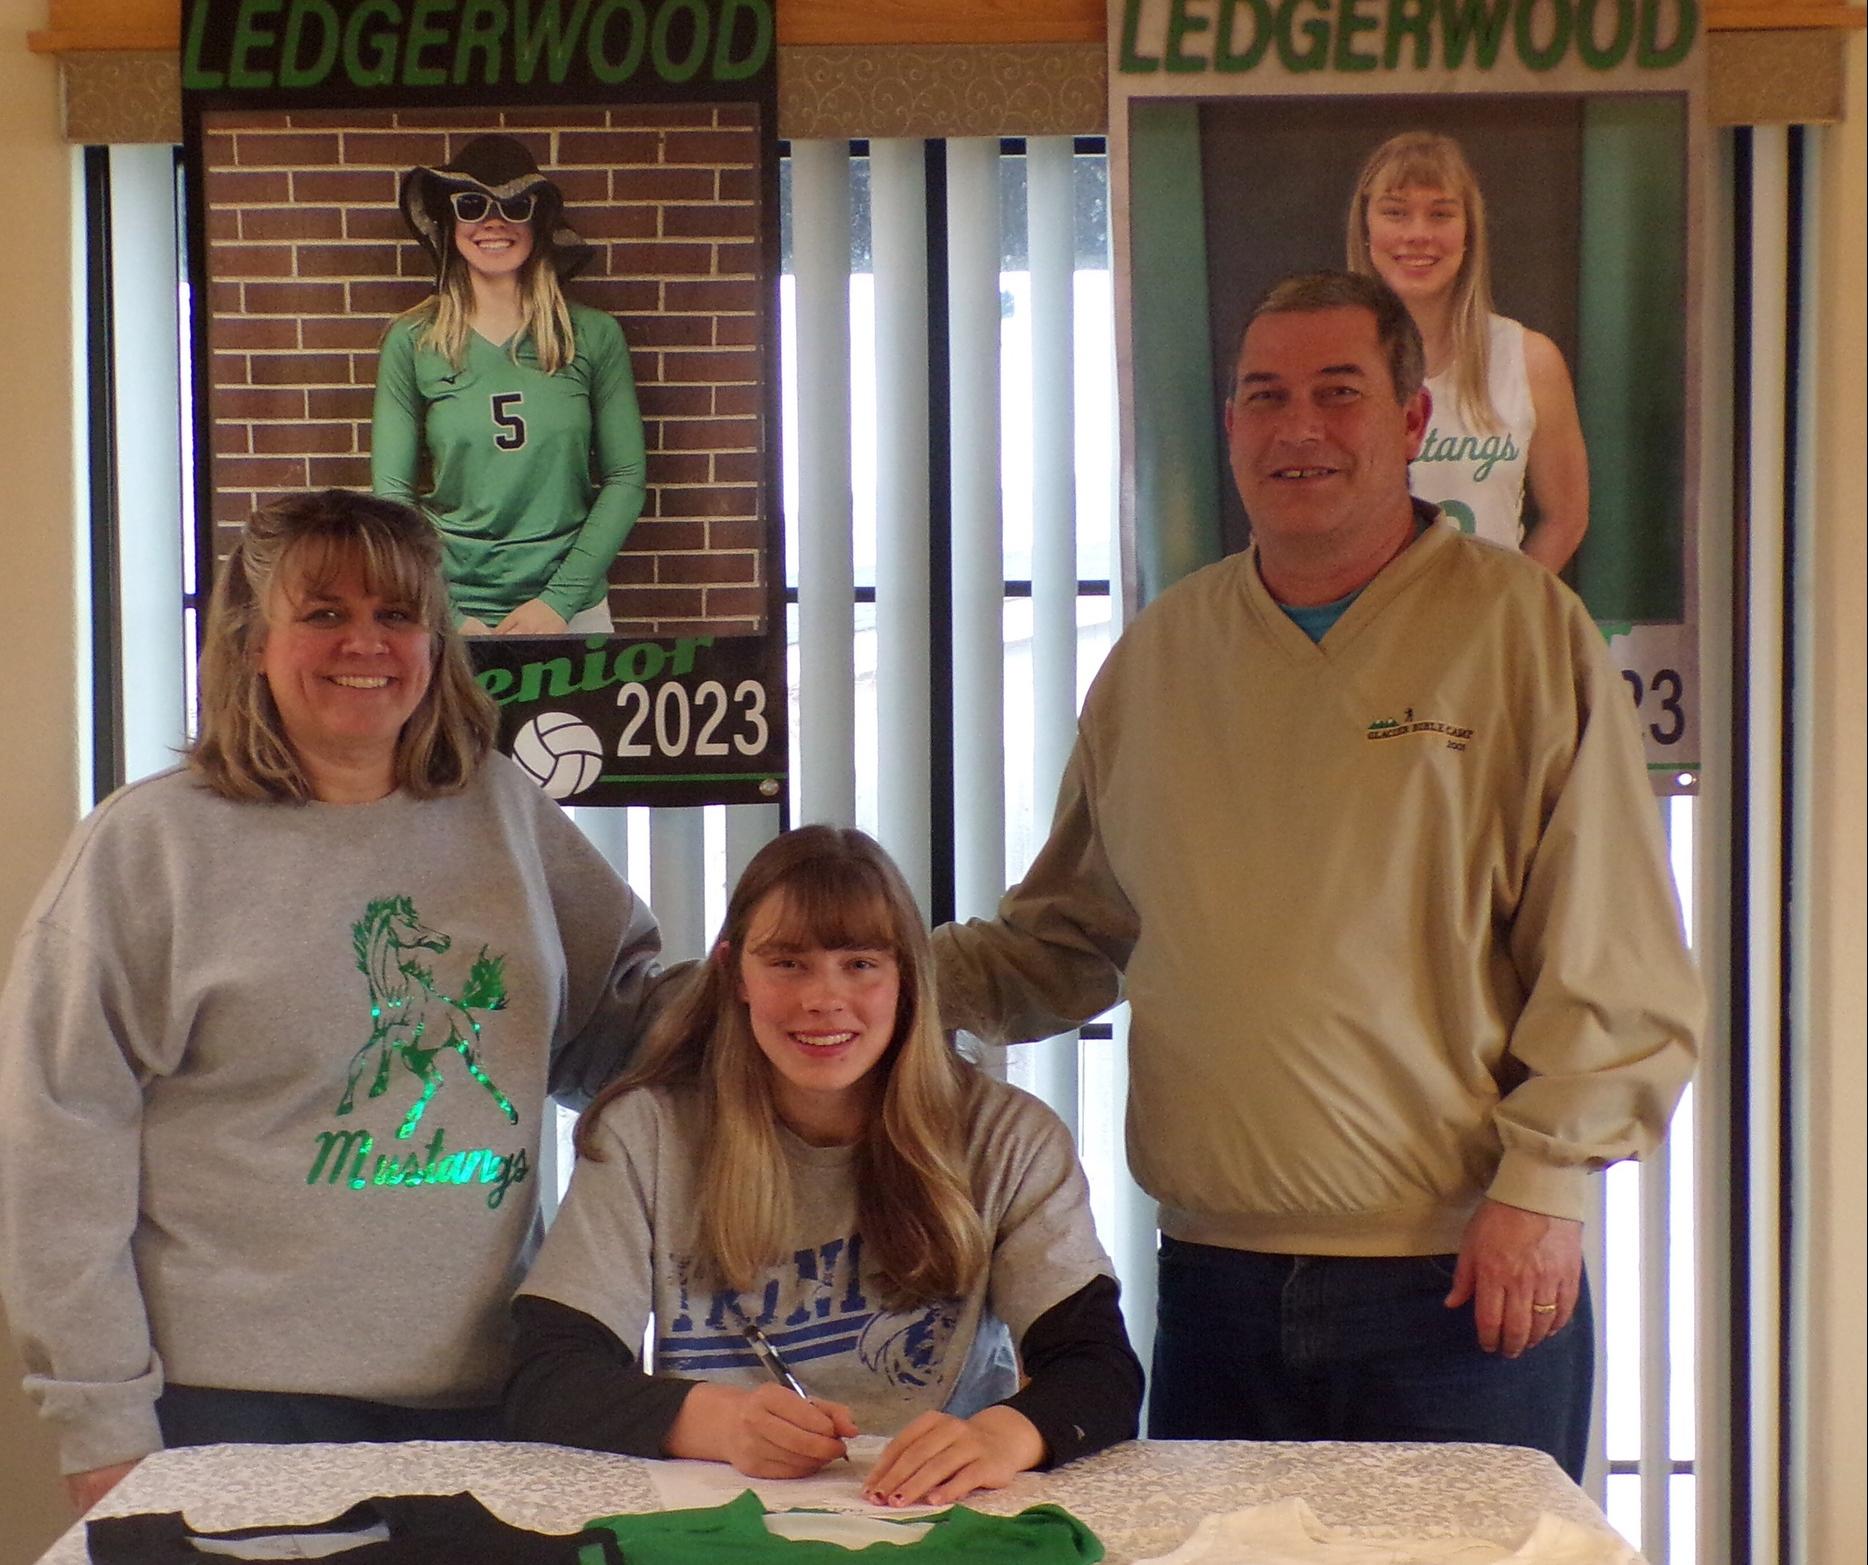 Lions Sign Marlyssa Ledgerwood for 2023-2024 Volleyball and Basketball Season